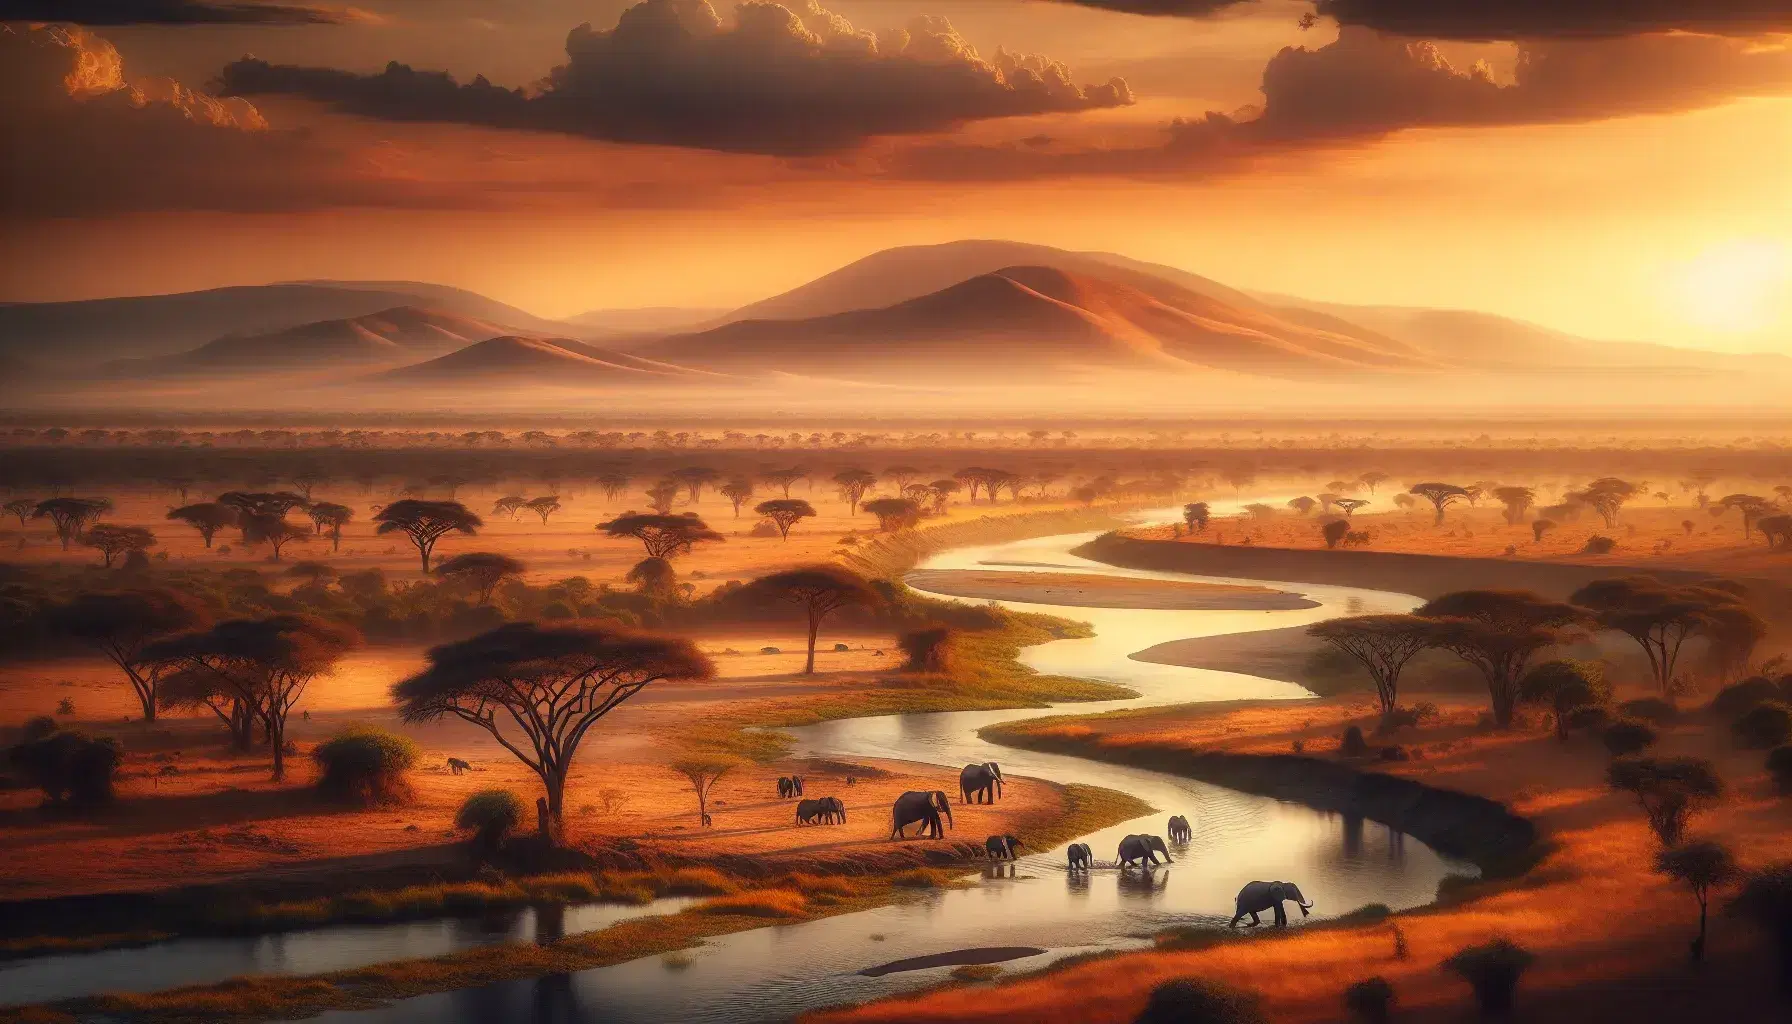 Golden sunset over the African savannah with hills on the horizon, serene river, acacia trees and a group of elephants near the water.